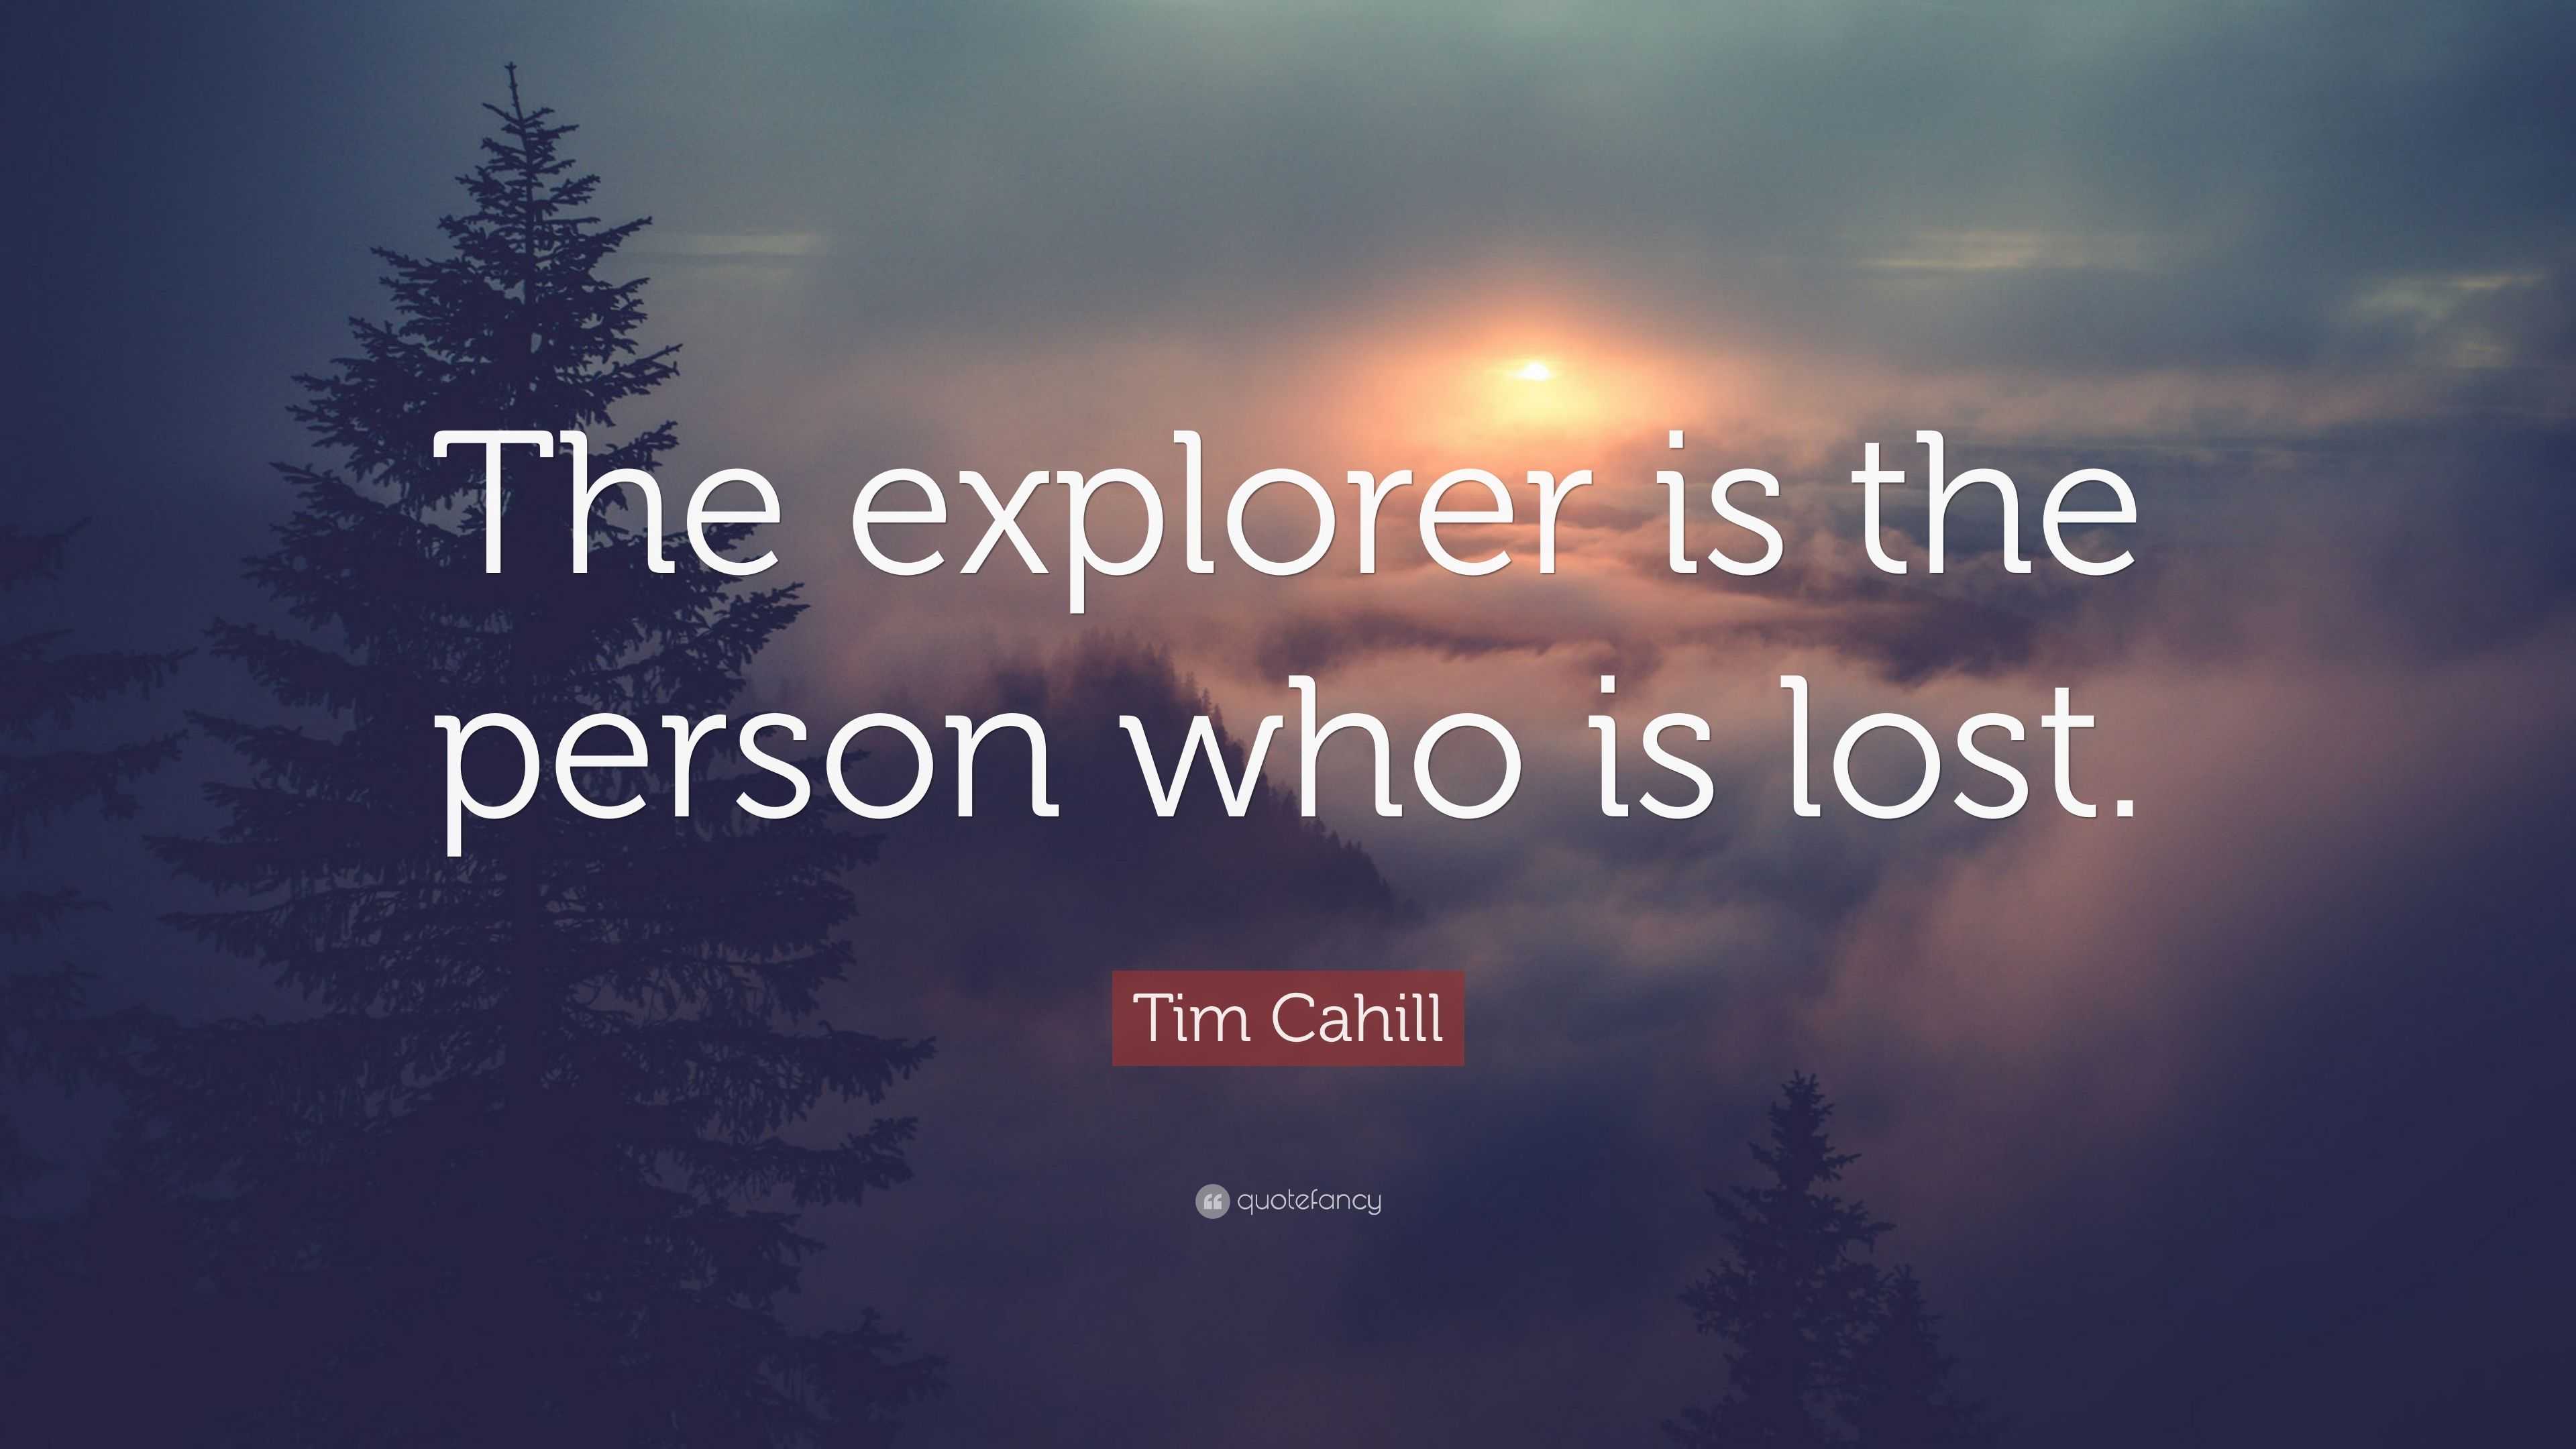 Tim Cahill Quote: “The explorer is the person who is lost.”